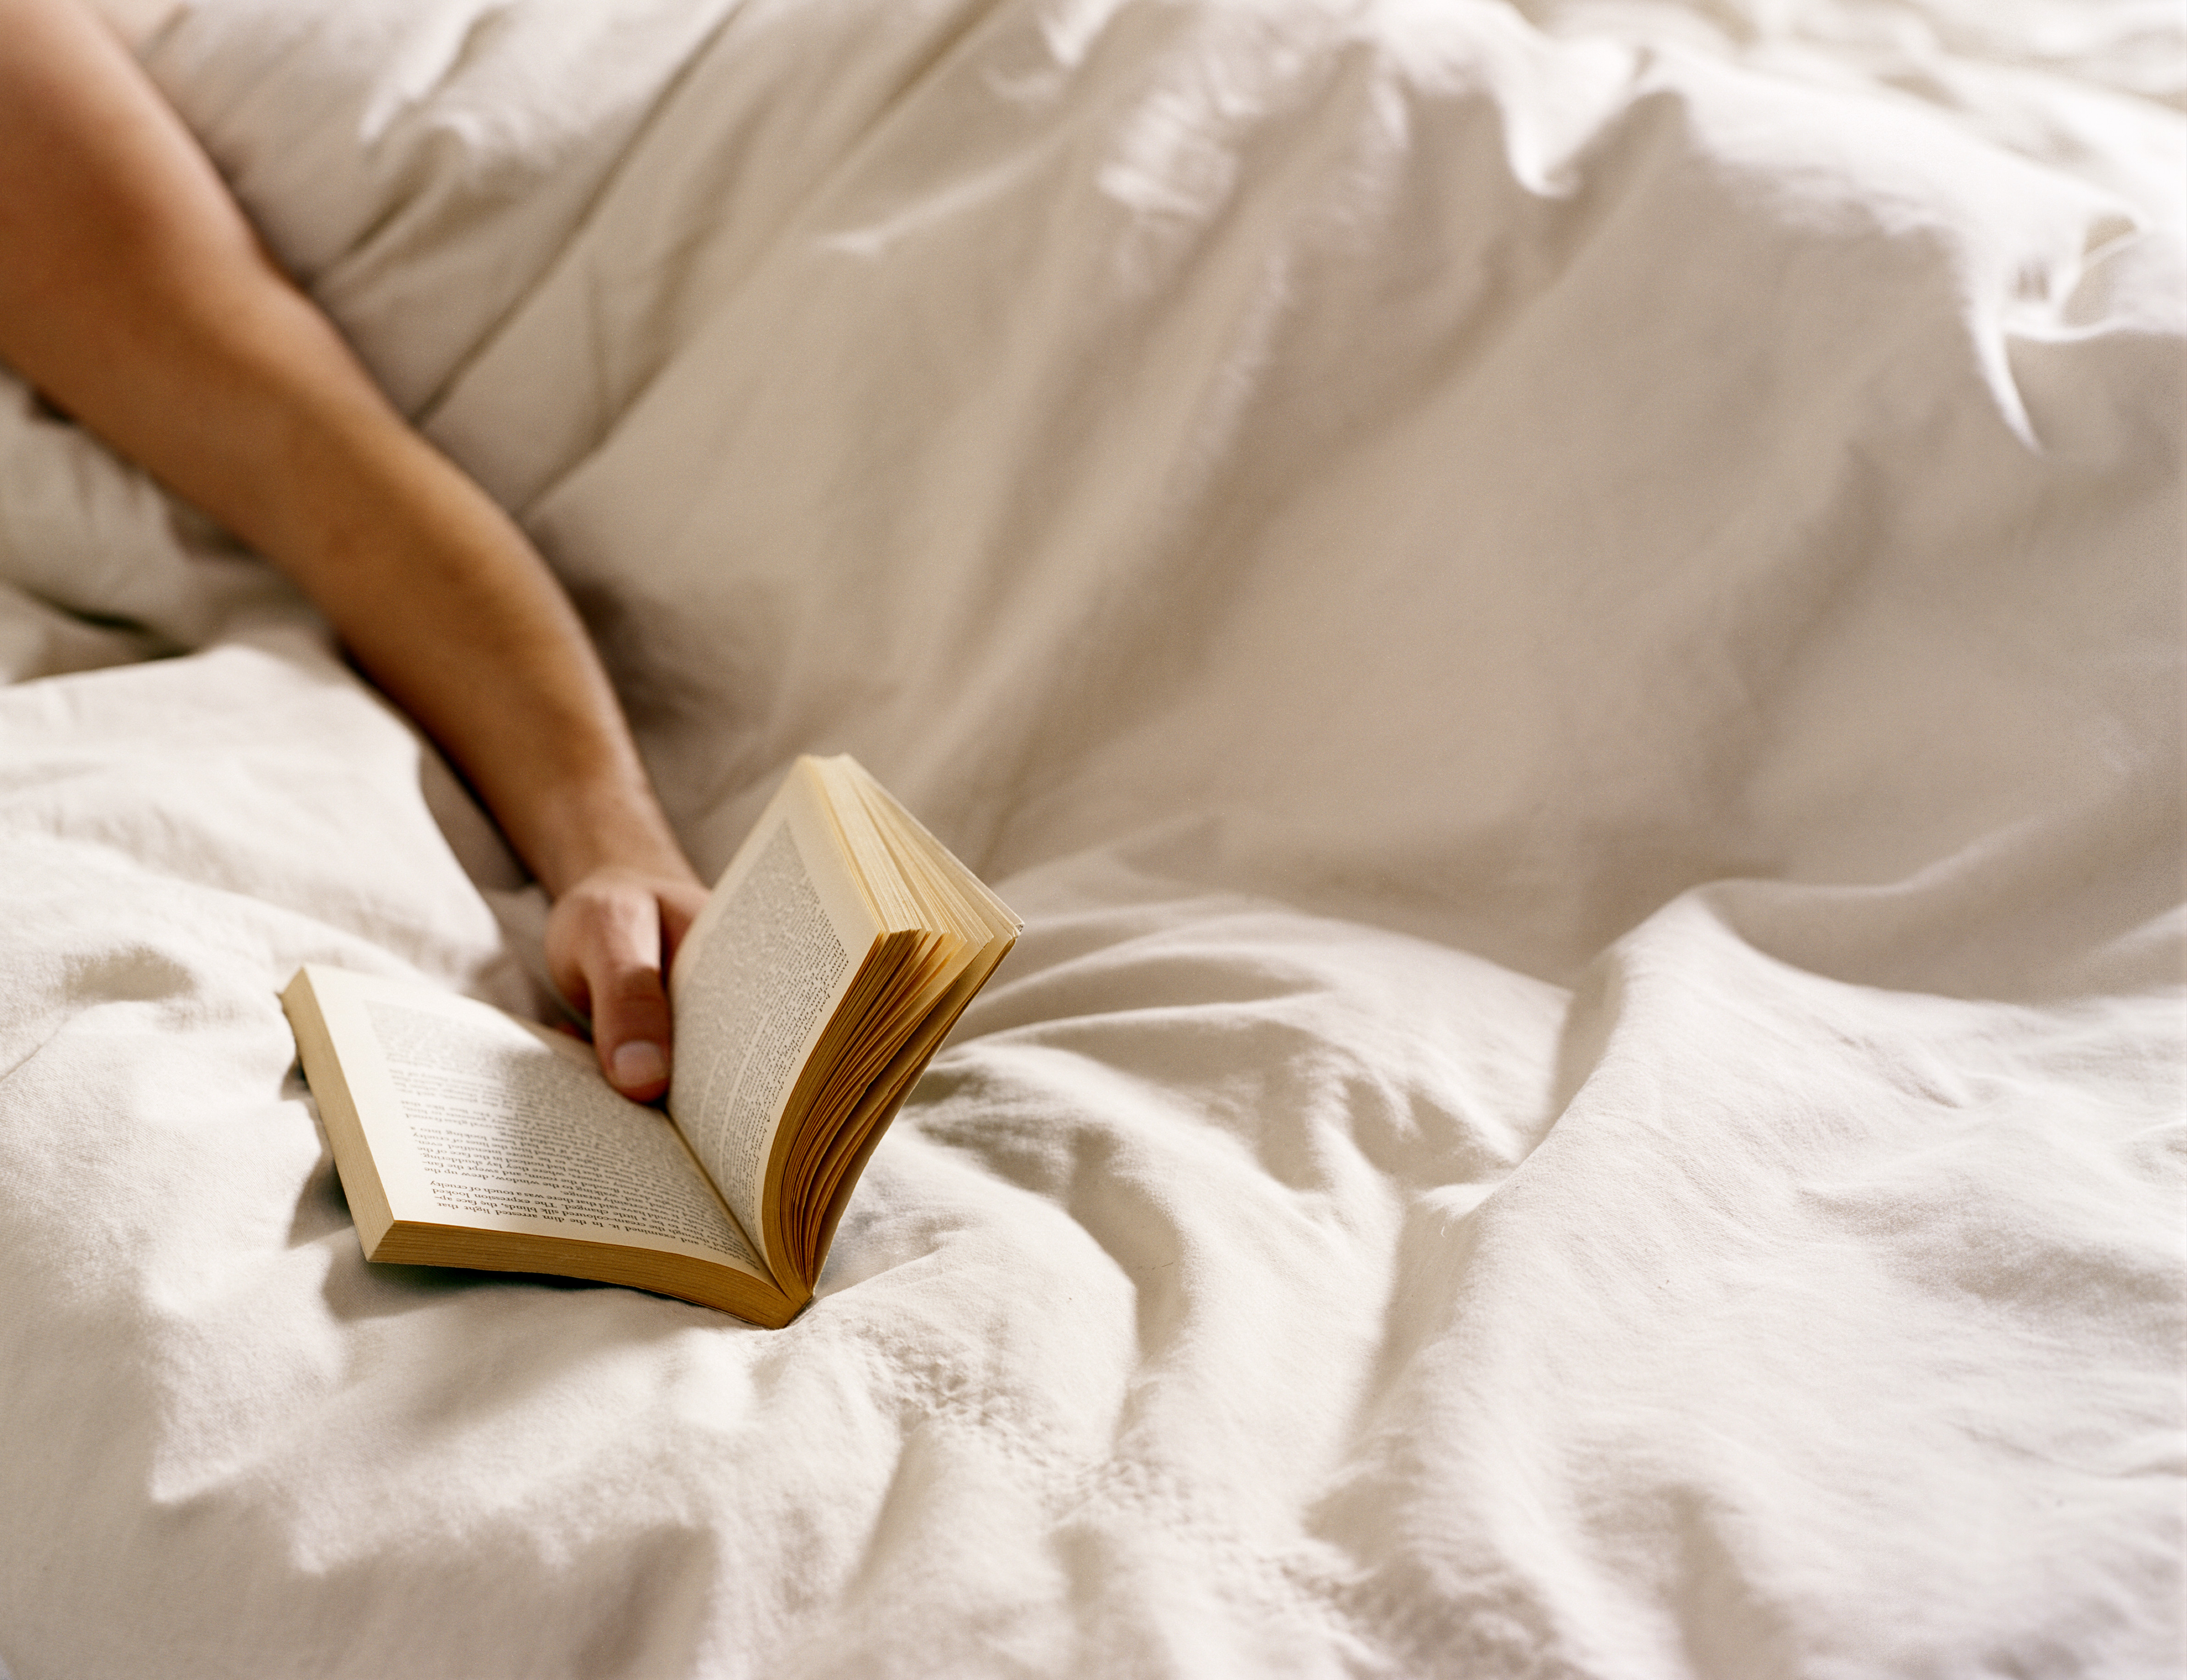 Young man holding open book on bed, close-up